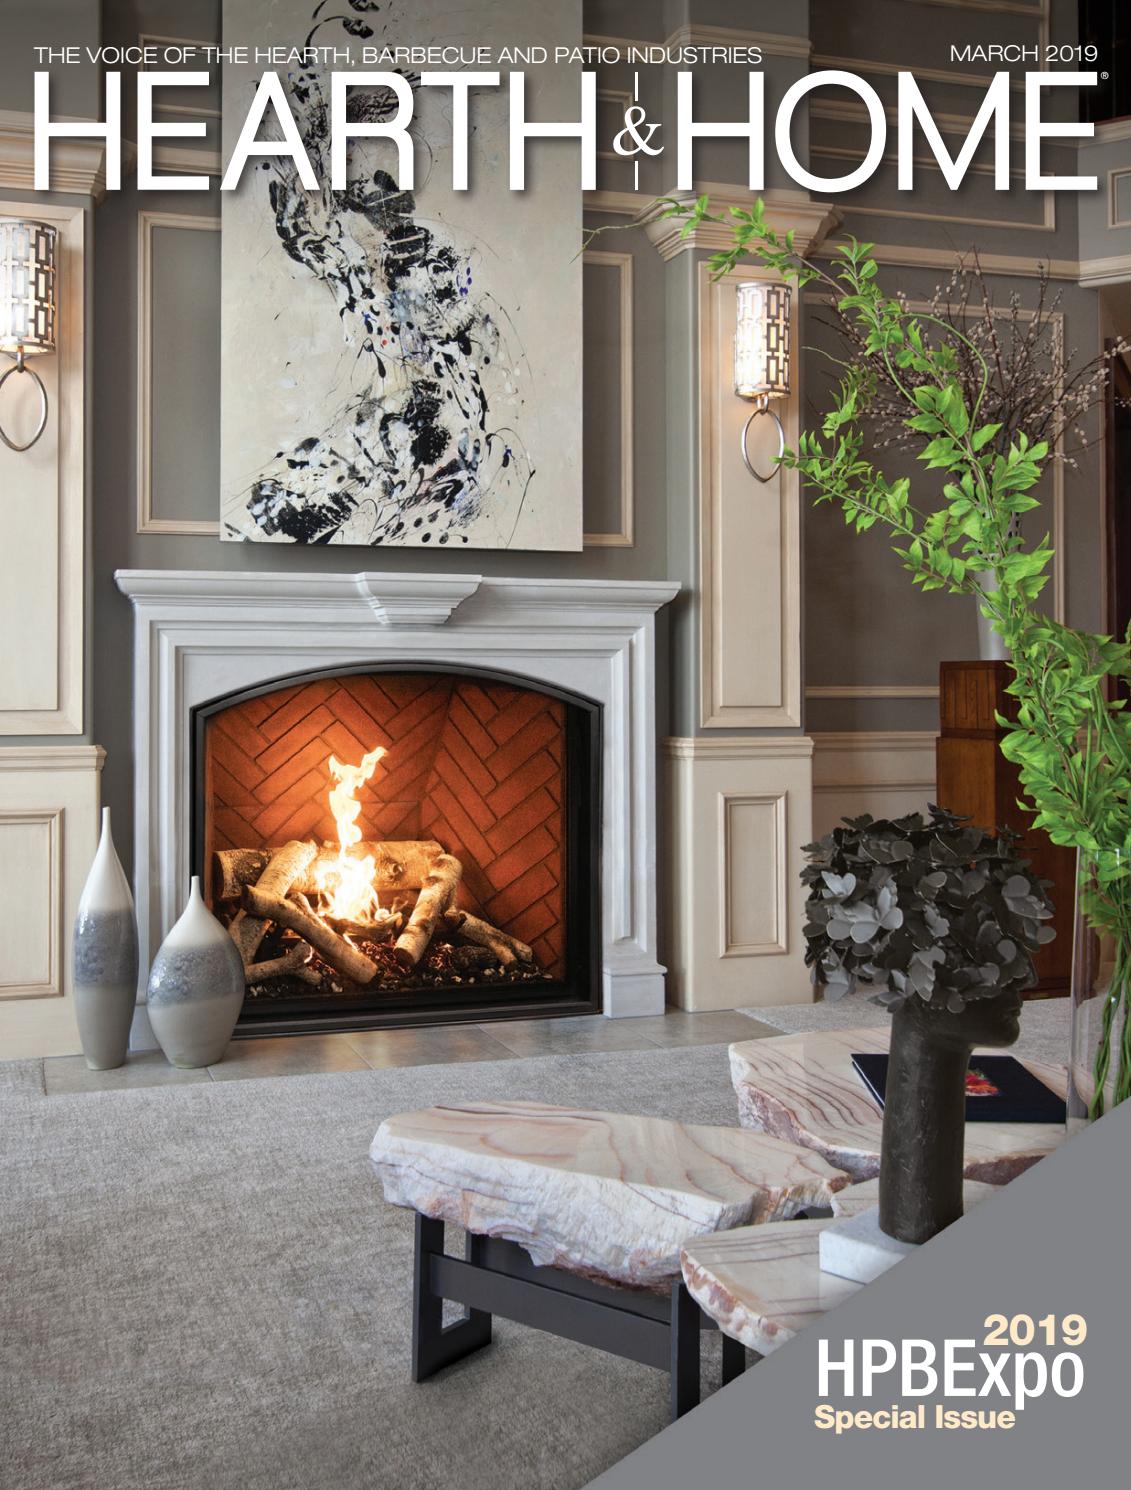 18 Inch Electric Fireplace Insert Fresh Hearth & Home Magazine – 2019 March issue by Hearth & Home